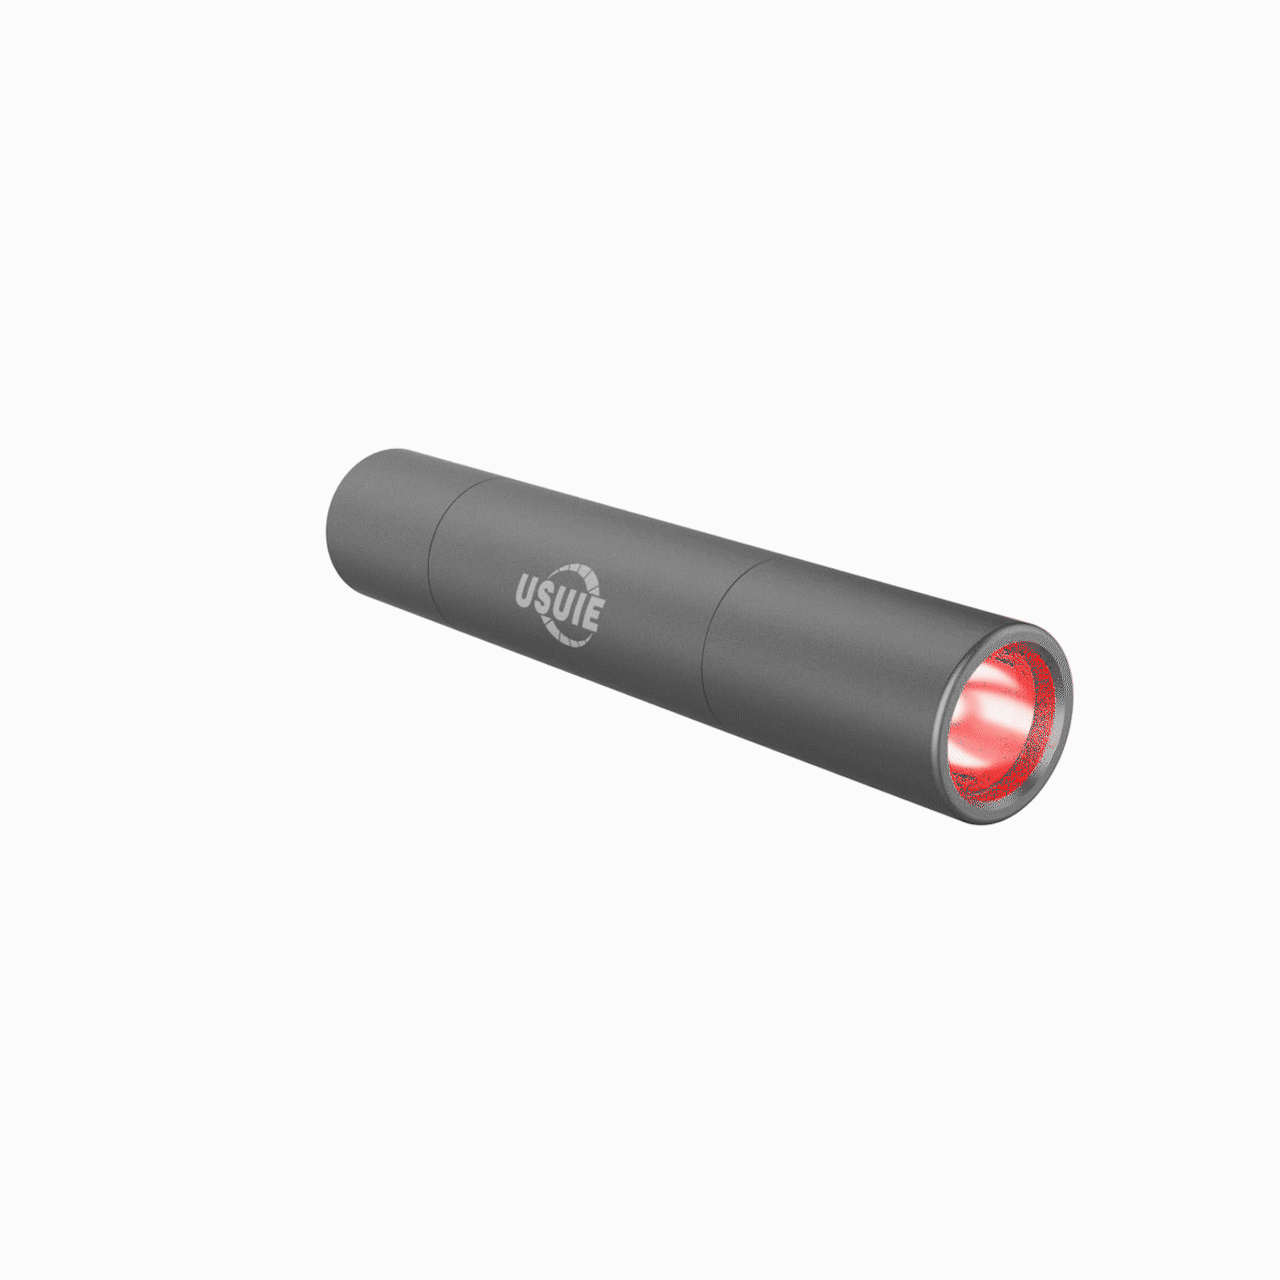 Handheld Red Light Therapy Device - Usuie